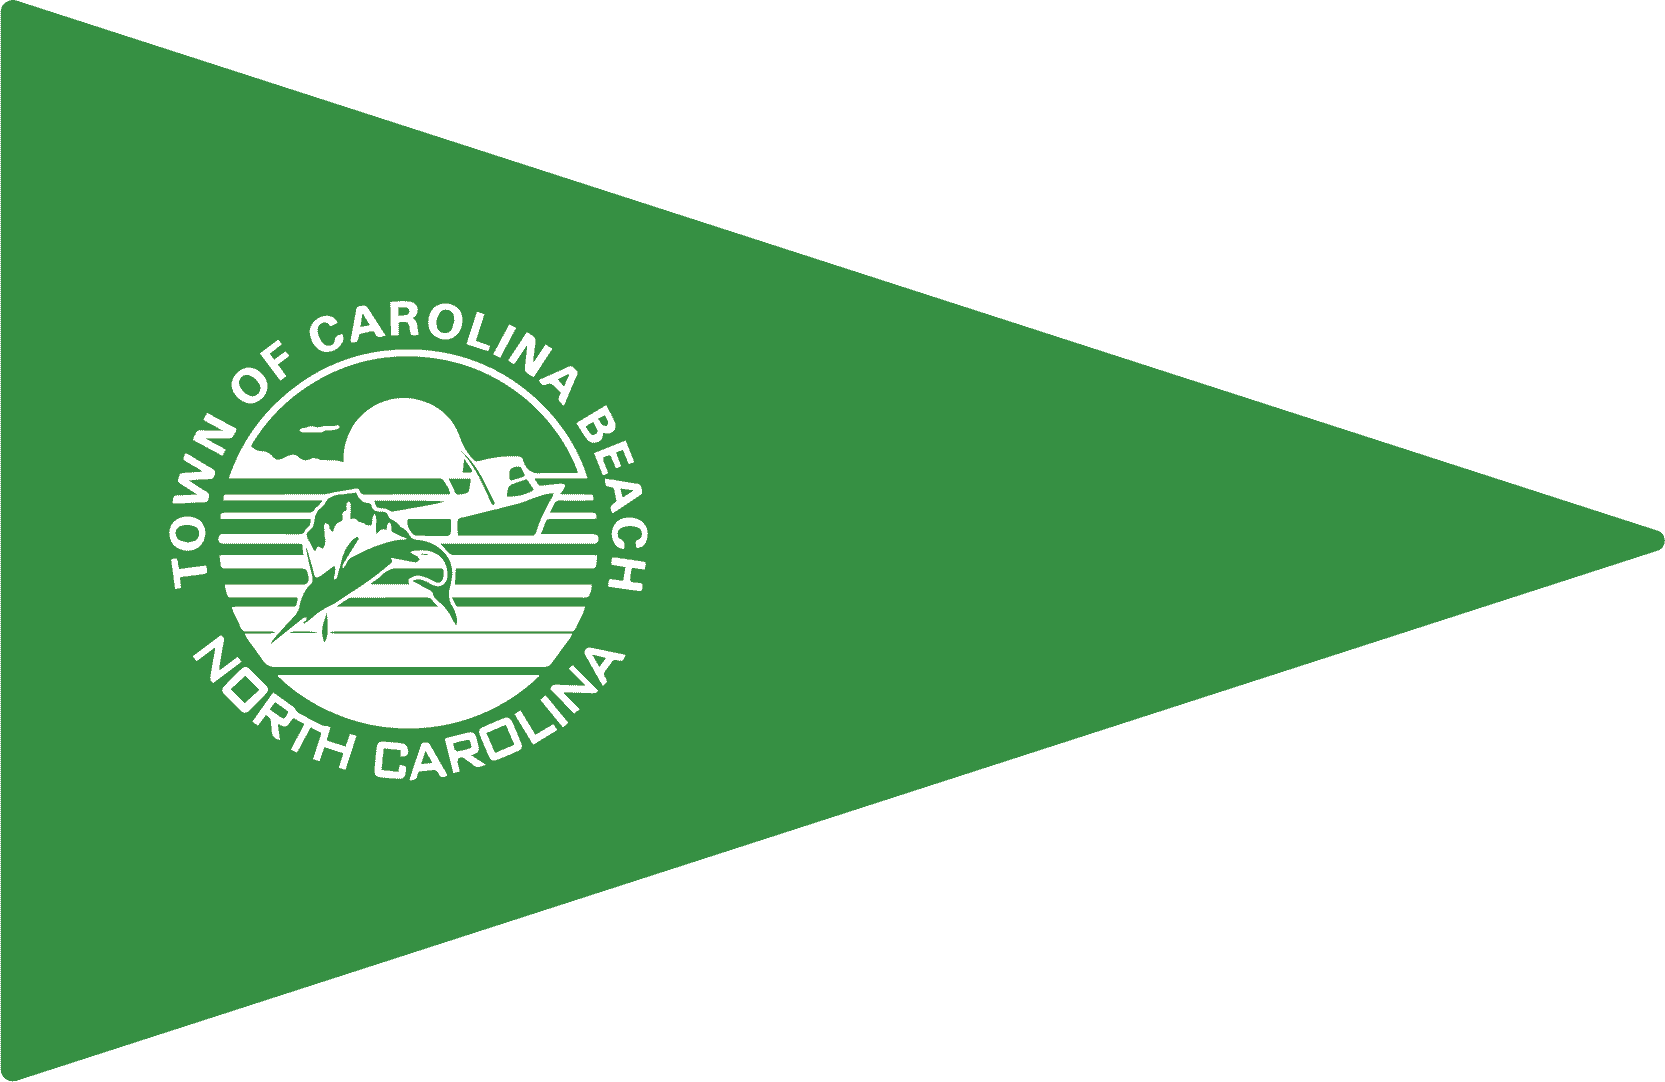 Today's Flag Color in Carolina Beach is a Green Flag